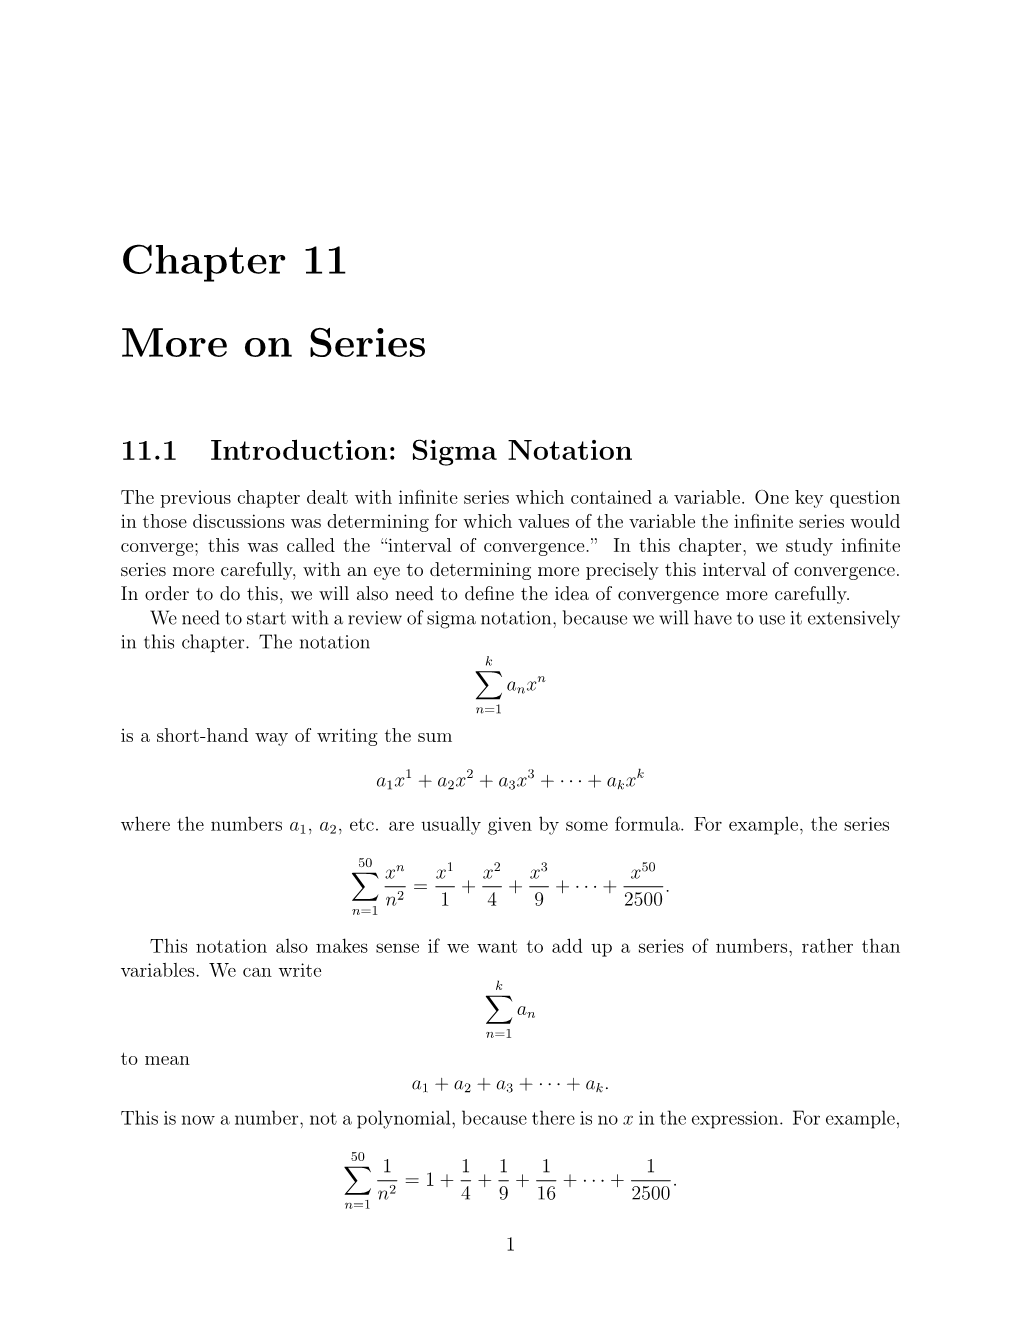 Chapter 11 More on Series